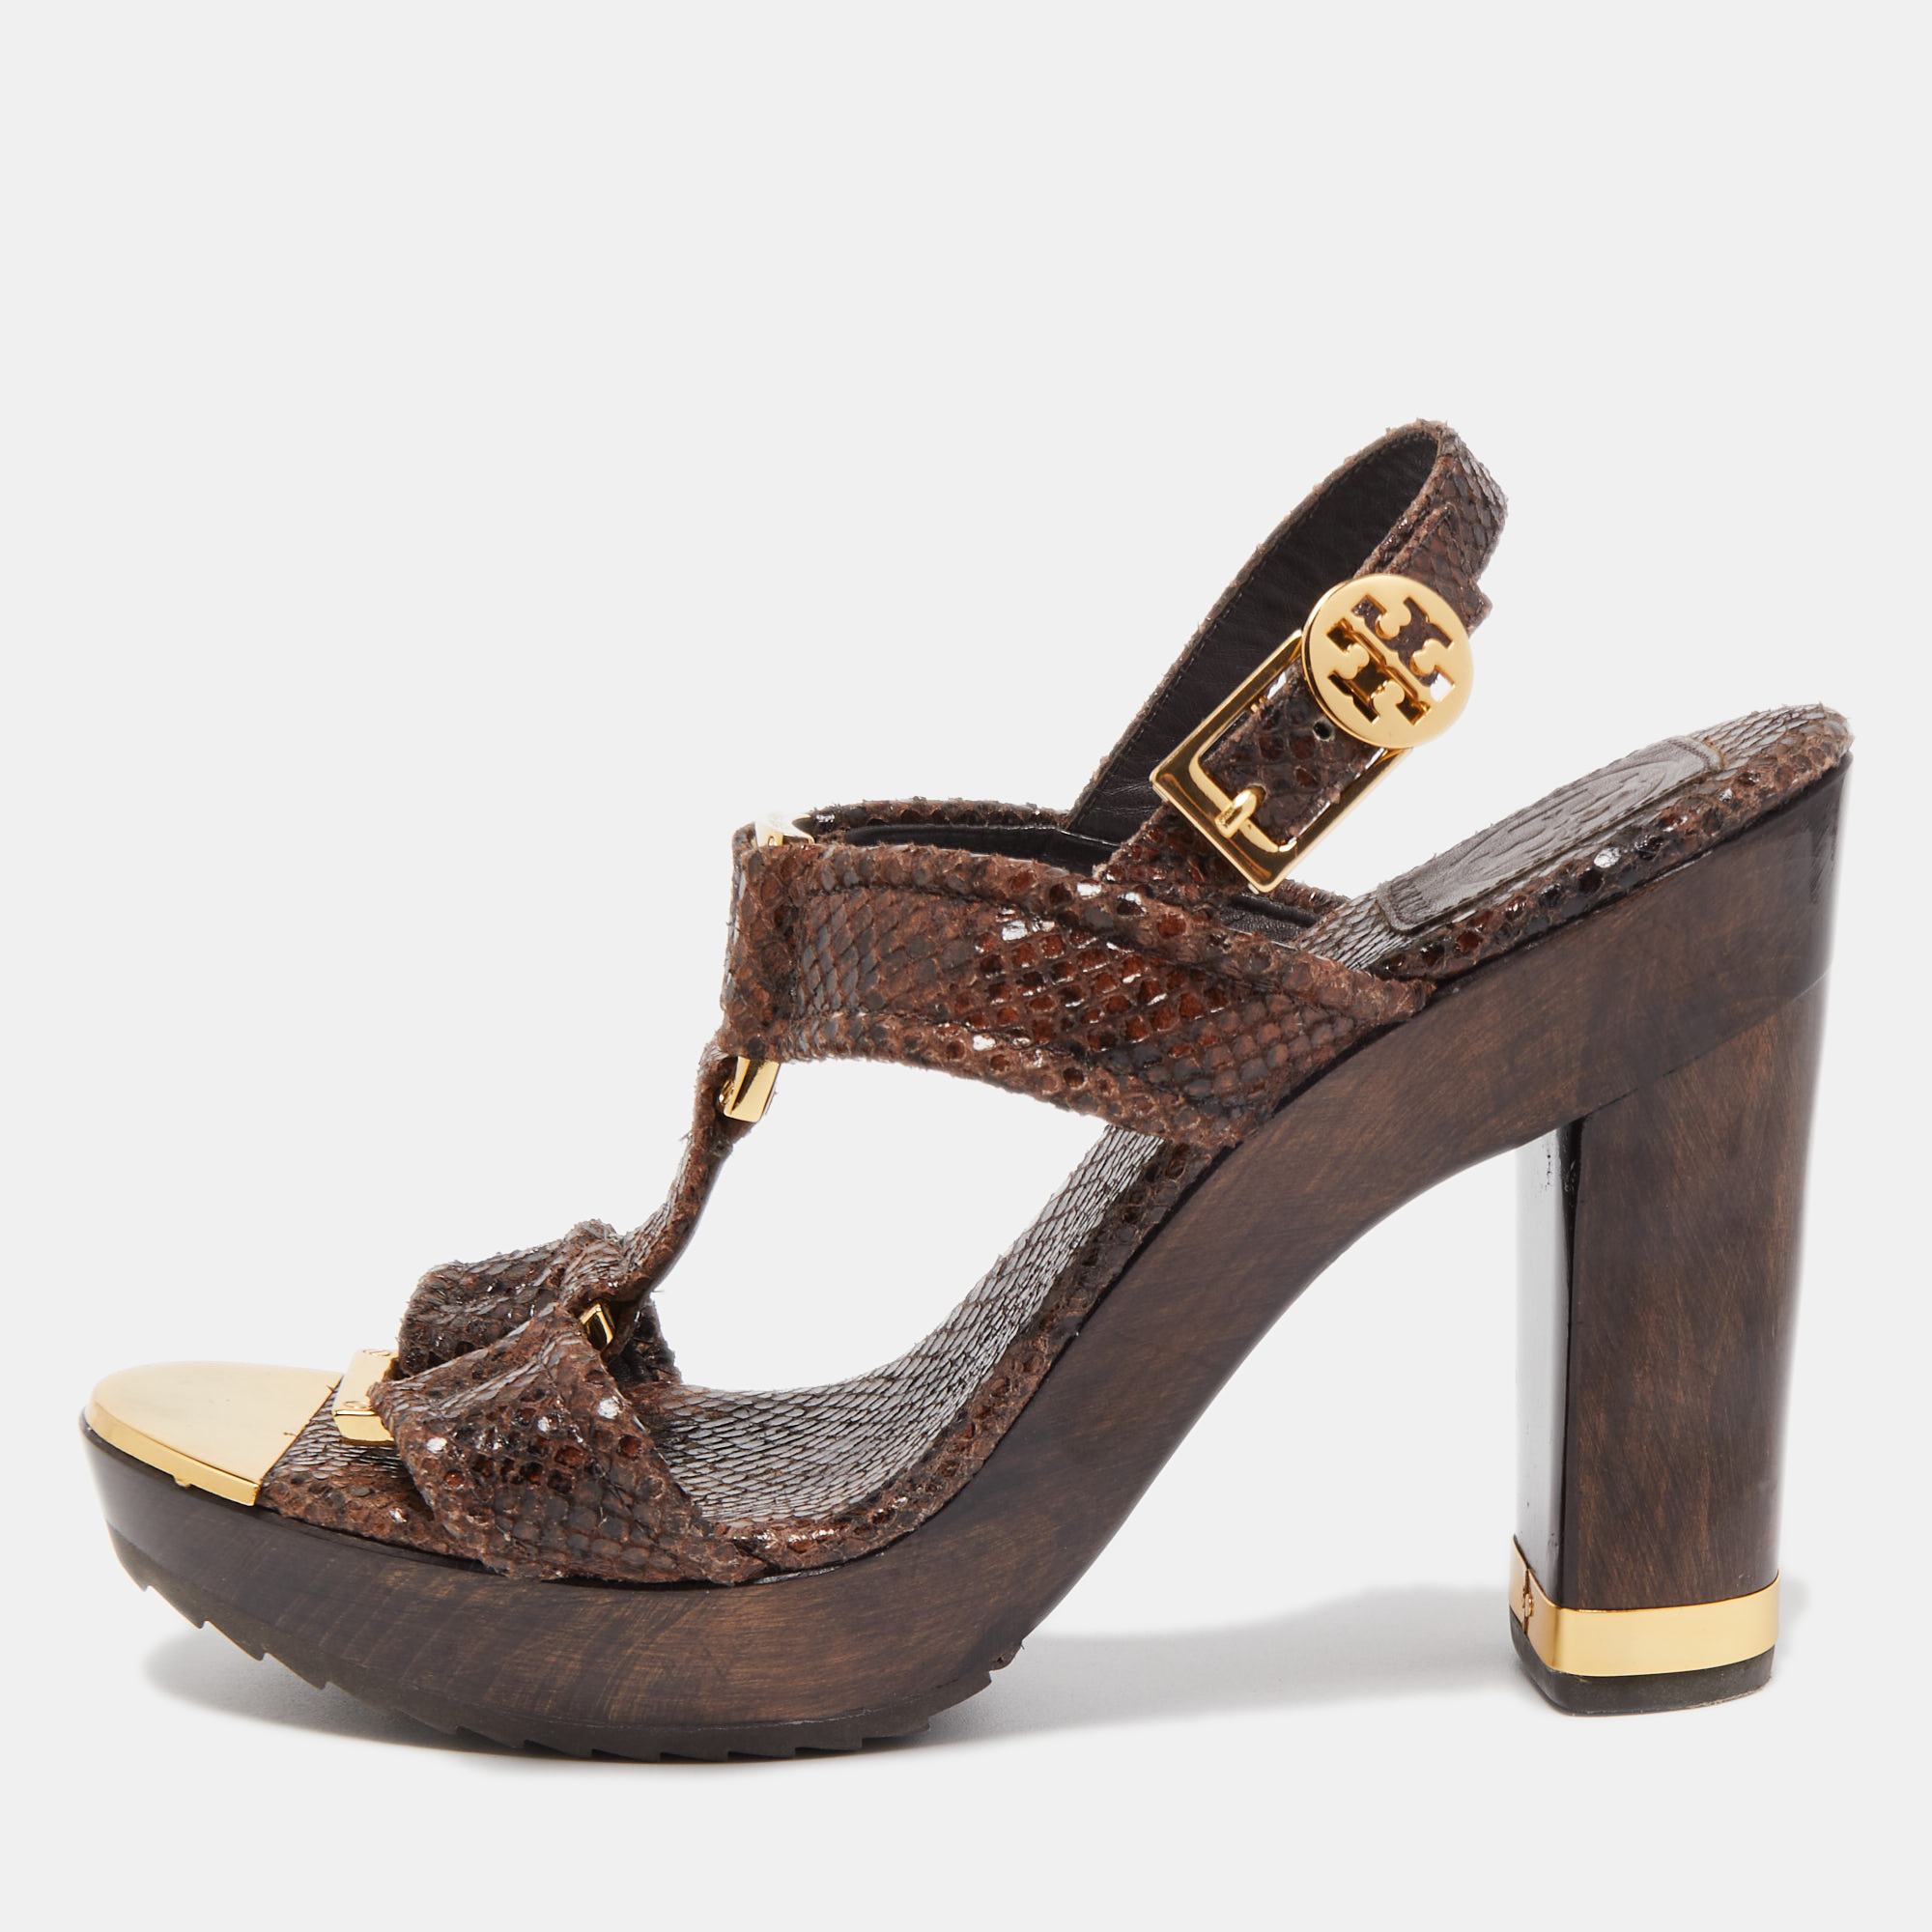 Pre-owned Tory Burch Brown Python Embossed Leather Slingback Sandals Size 38